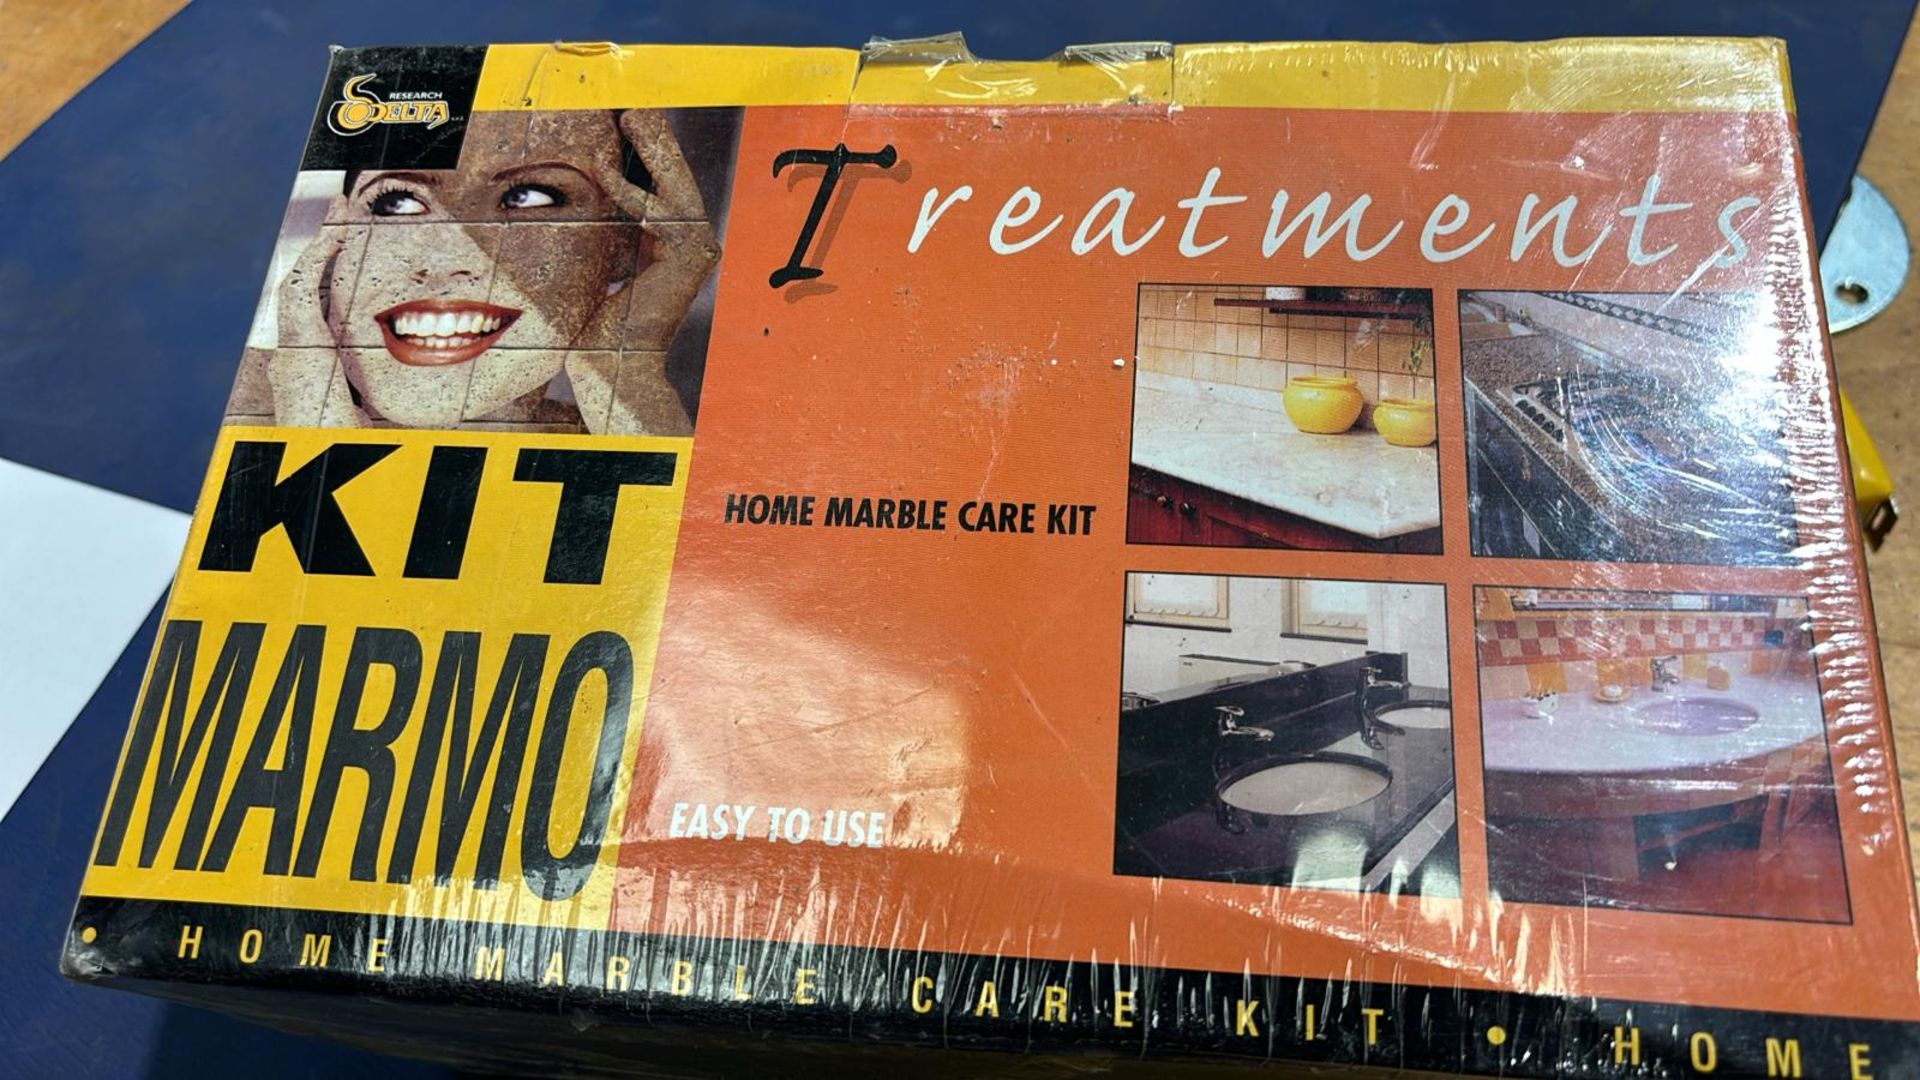 Brand New Boxed Home Marble Care Kit - Image 2 of 2